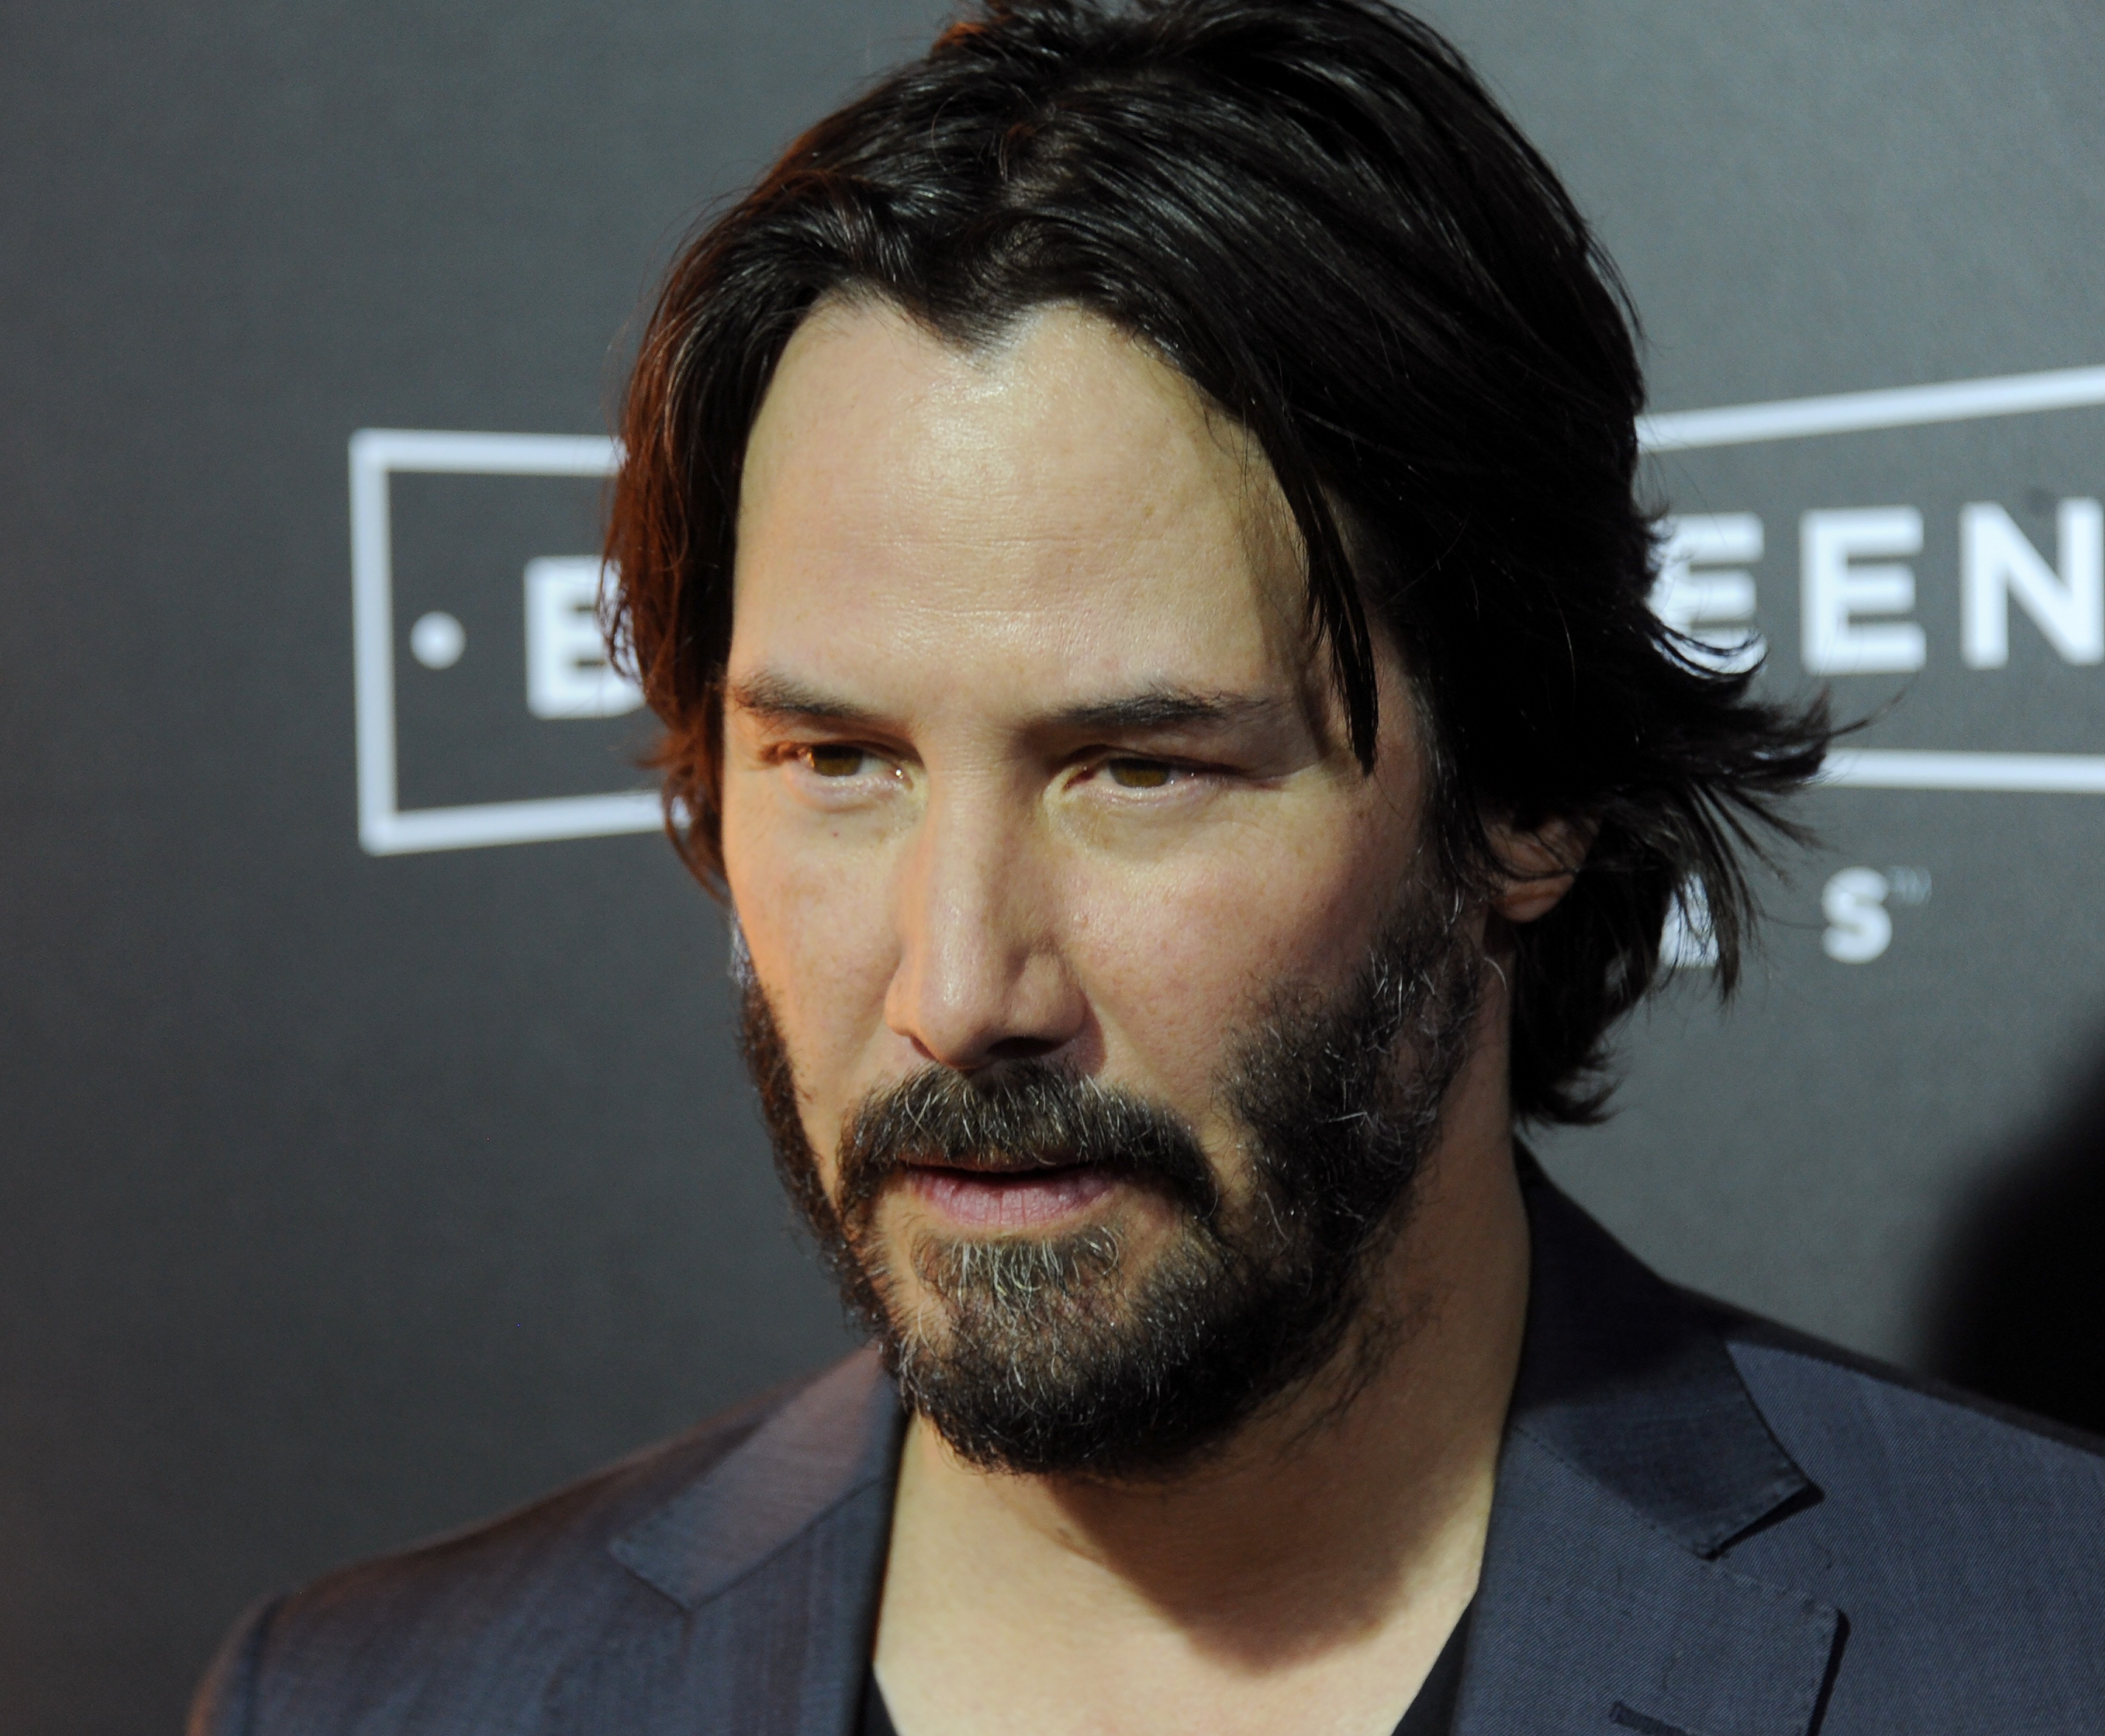 Keanu Reeves on June 14, 2016 in Hollywood, California. | Source: Getty Images